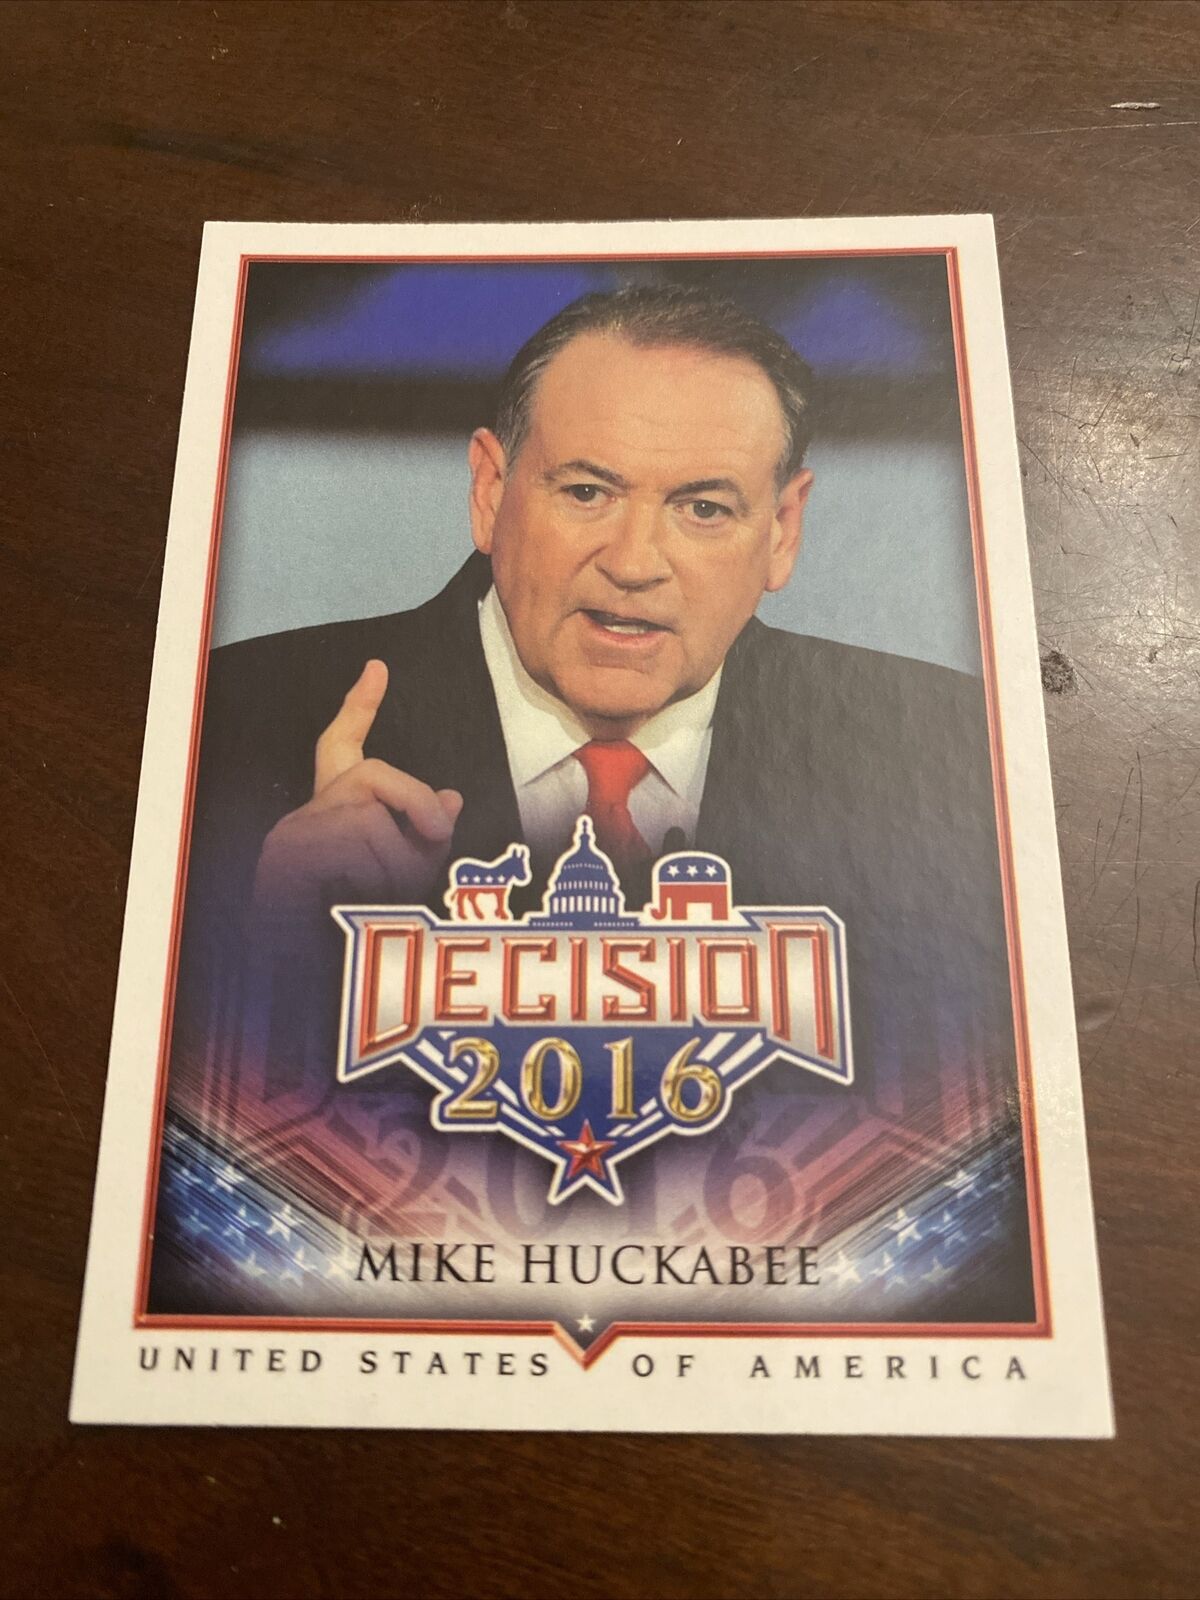 Mike Huckabee Decision 2016 Trading Card